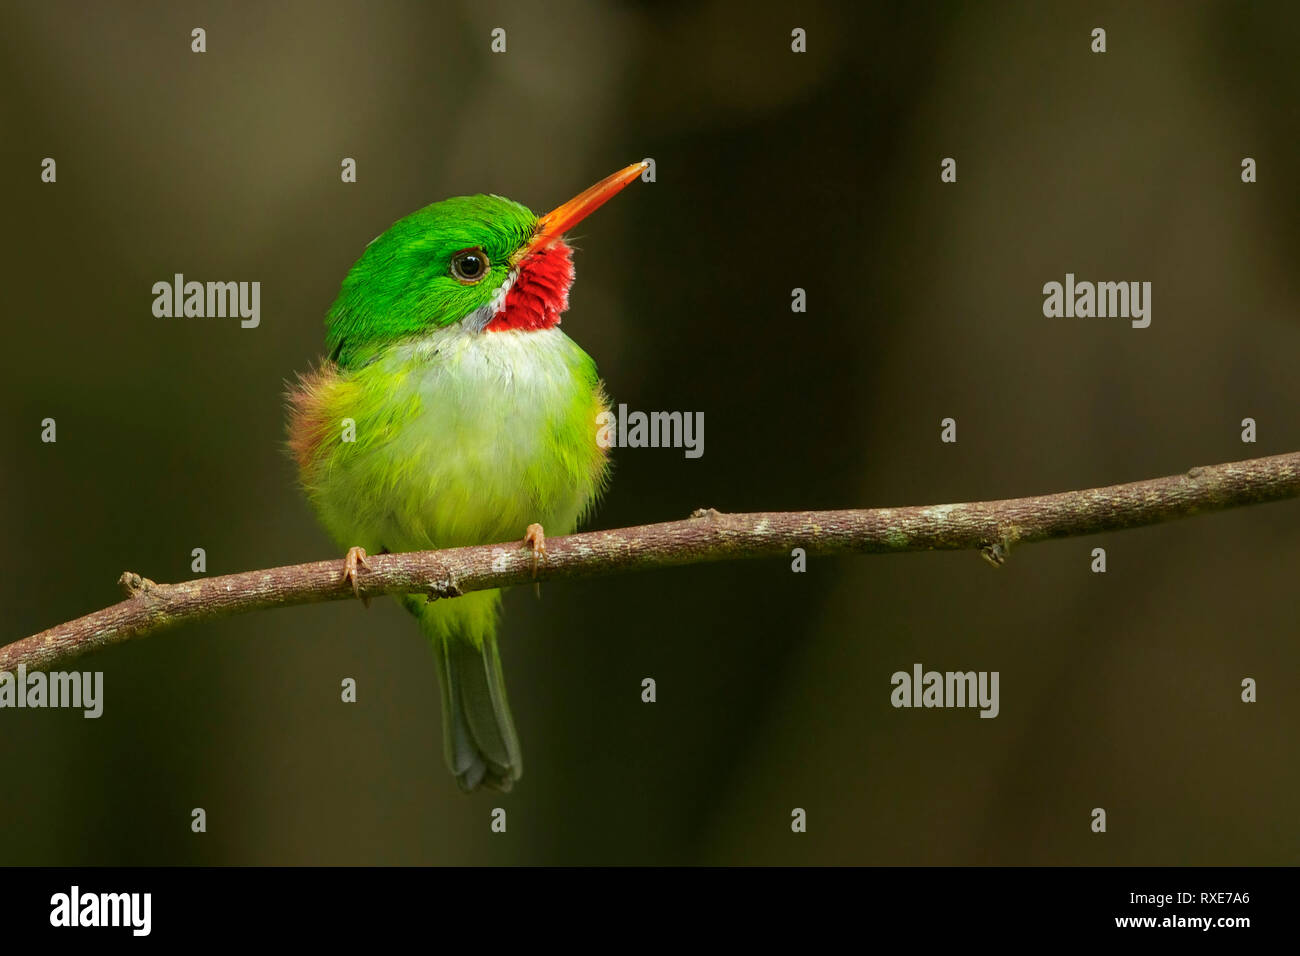 Jamaican Tody (Todus todus) perched on a branch in Jamaica in the Caribbean. Stock Photo